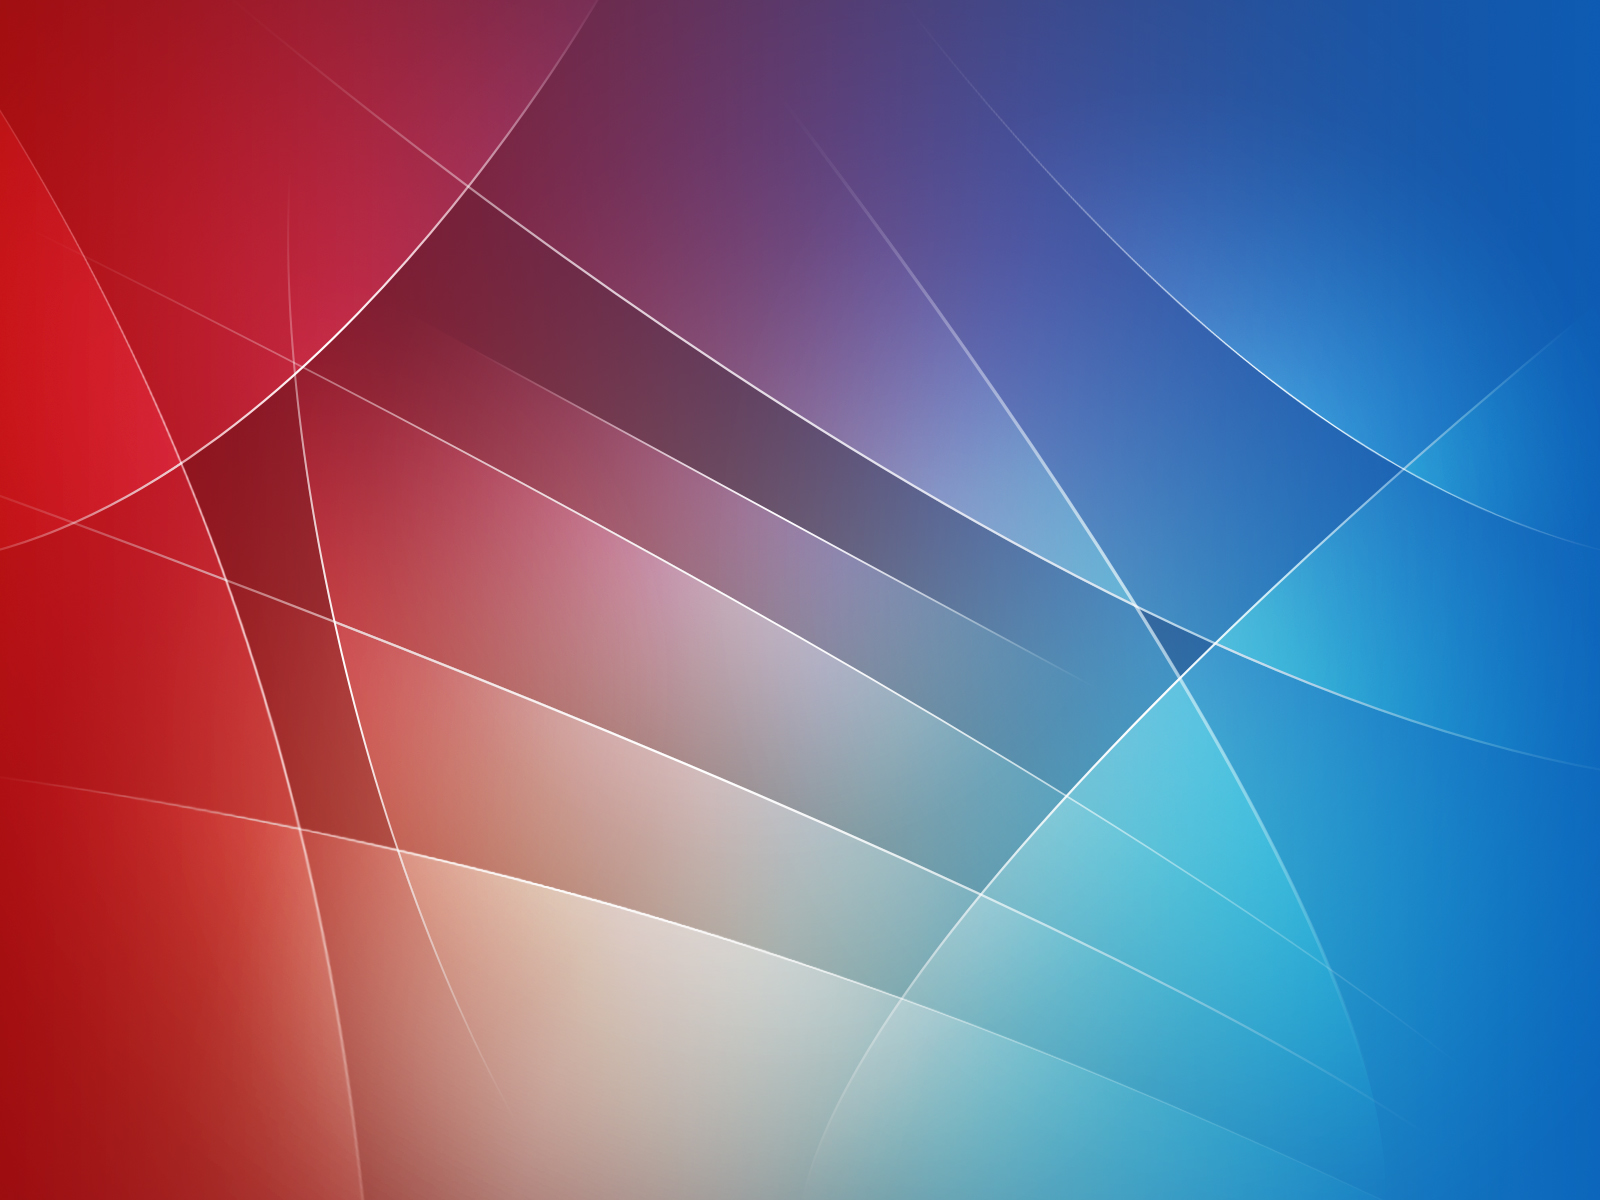 46+ Red and Blue Wallpaper on WallpaperSafari